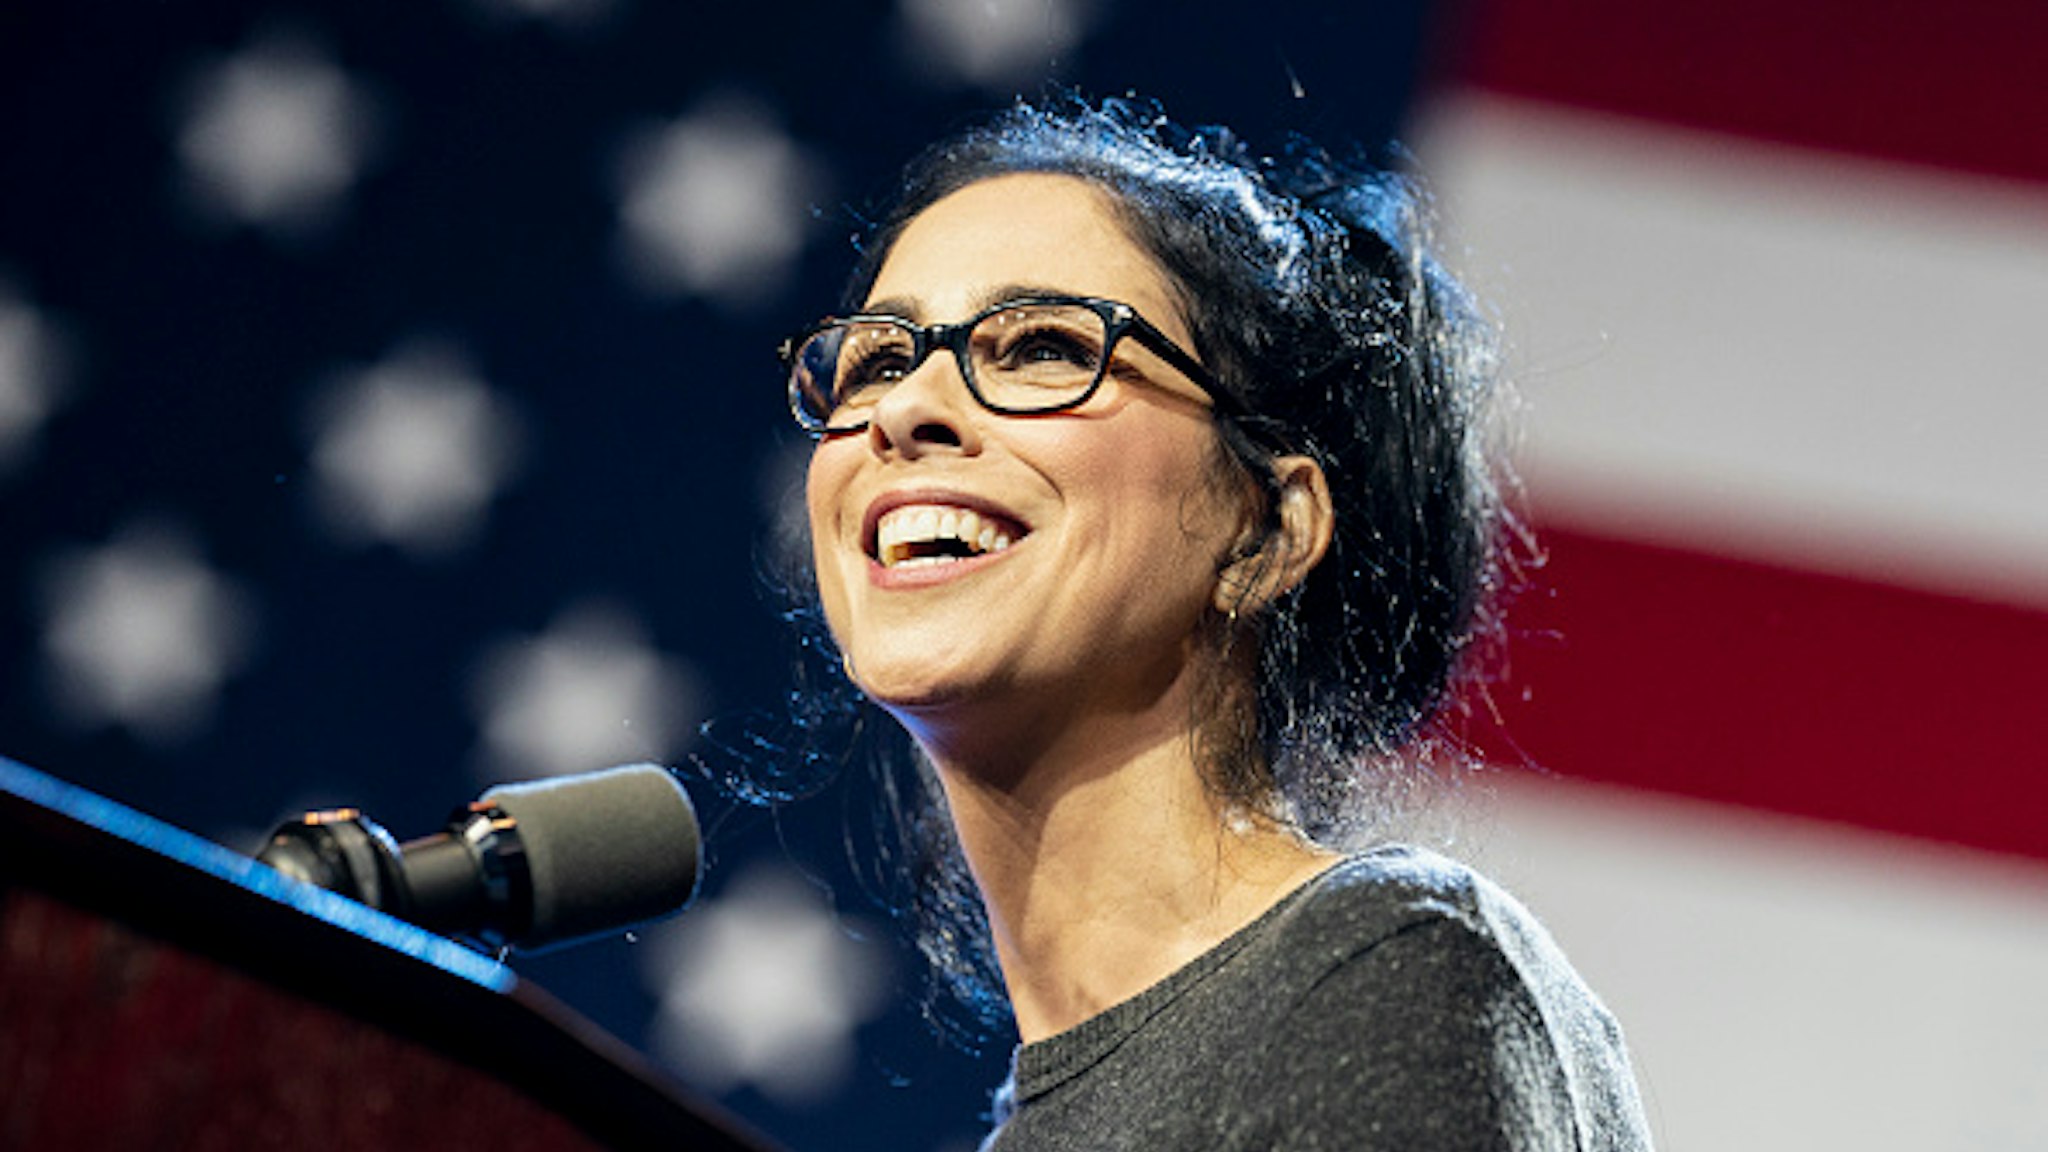 LOS ANGELES, UNITED STATES - MARCH 1, 2020: Comedian Sarah Silverman speaks at the campaign rally for Democratic presidential candidate Senator Bernie Sanders in Los Angeles, California. Sanders campaigns ahead of the upcoming Super Tuesday Democratic presidential primaries.